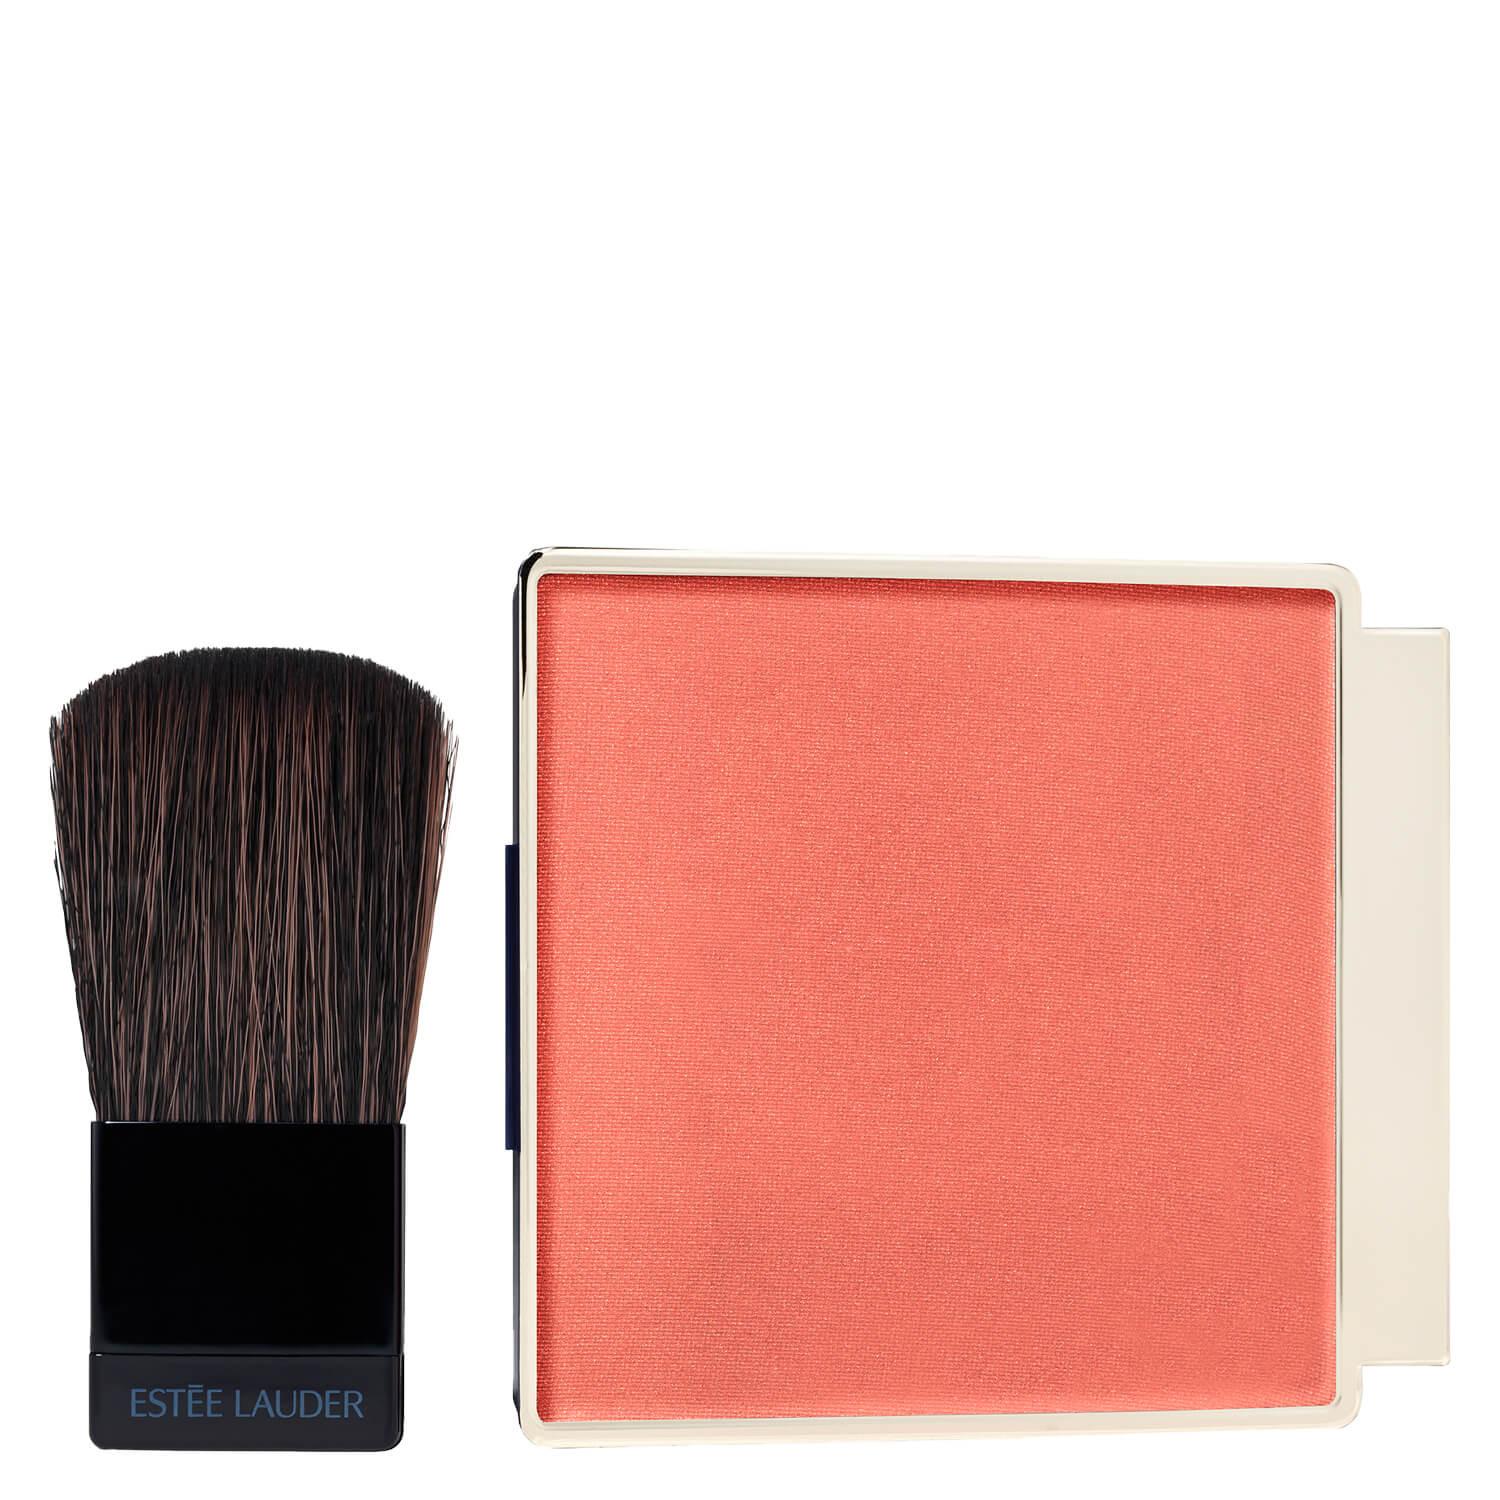 Pure Color Envy Sculpting Blush Wild Sunset 330 Refill